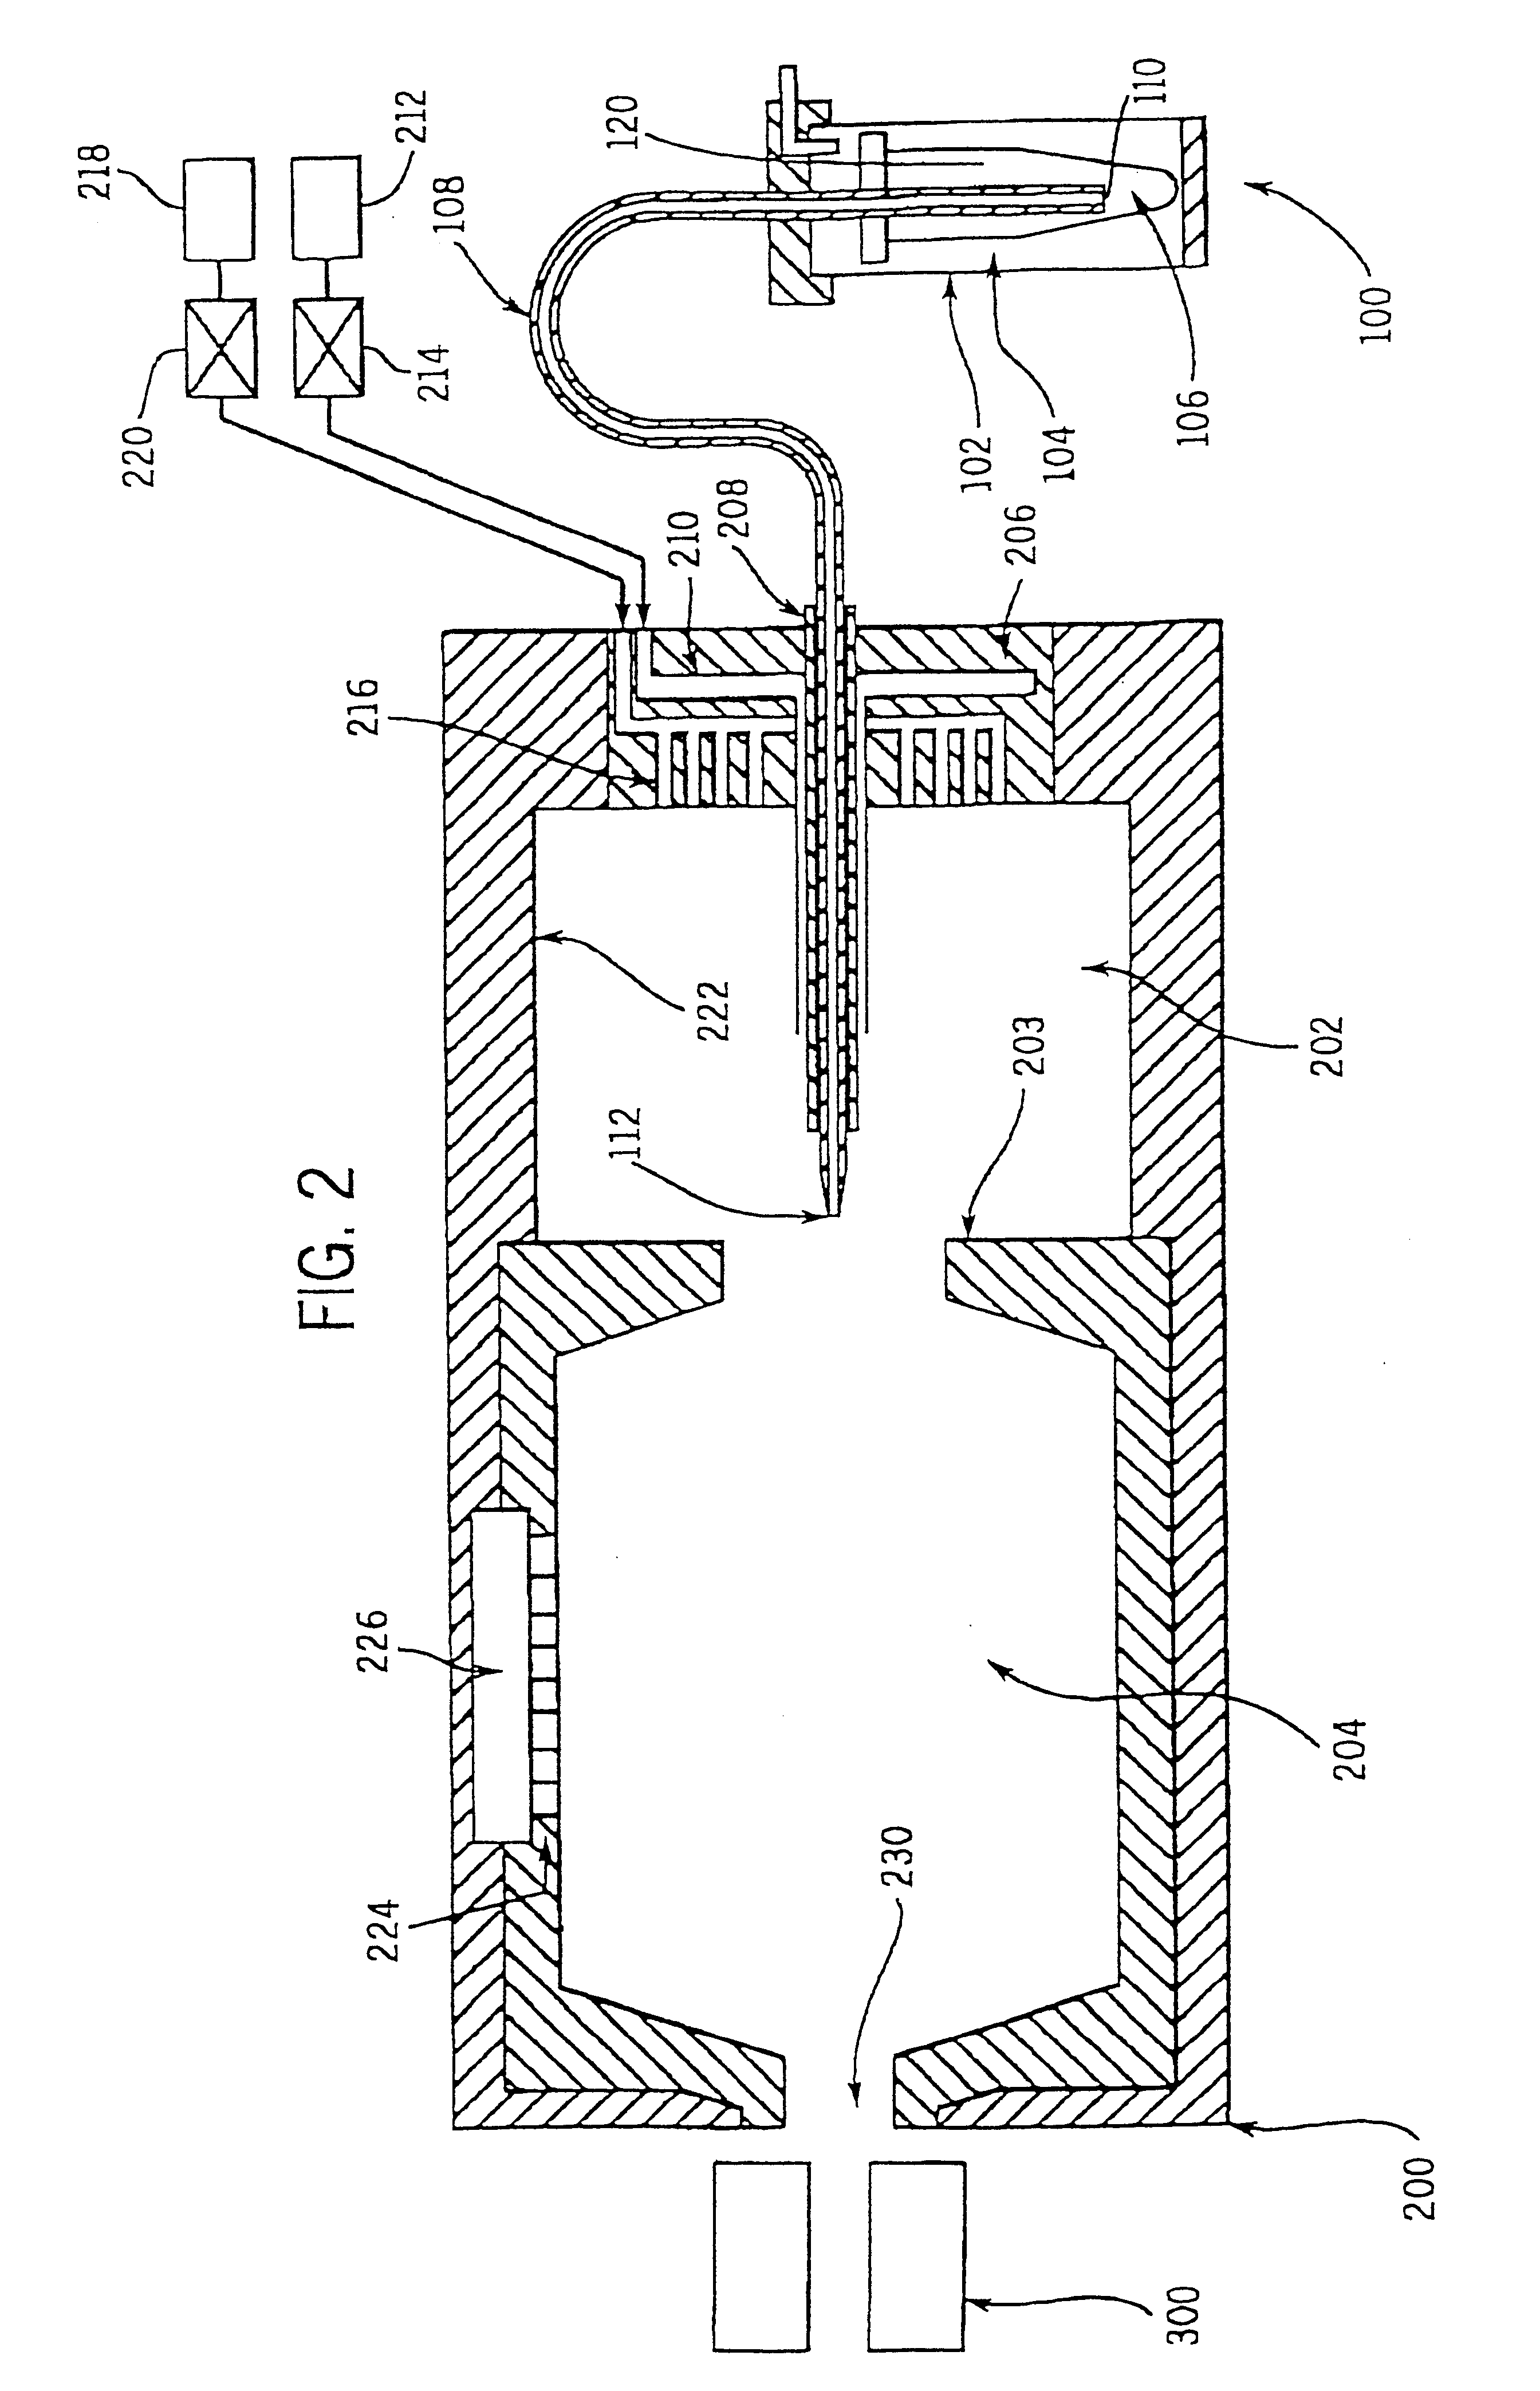 Charge reduction in electrospray mass spectrometry